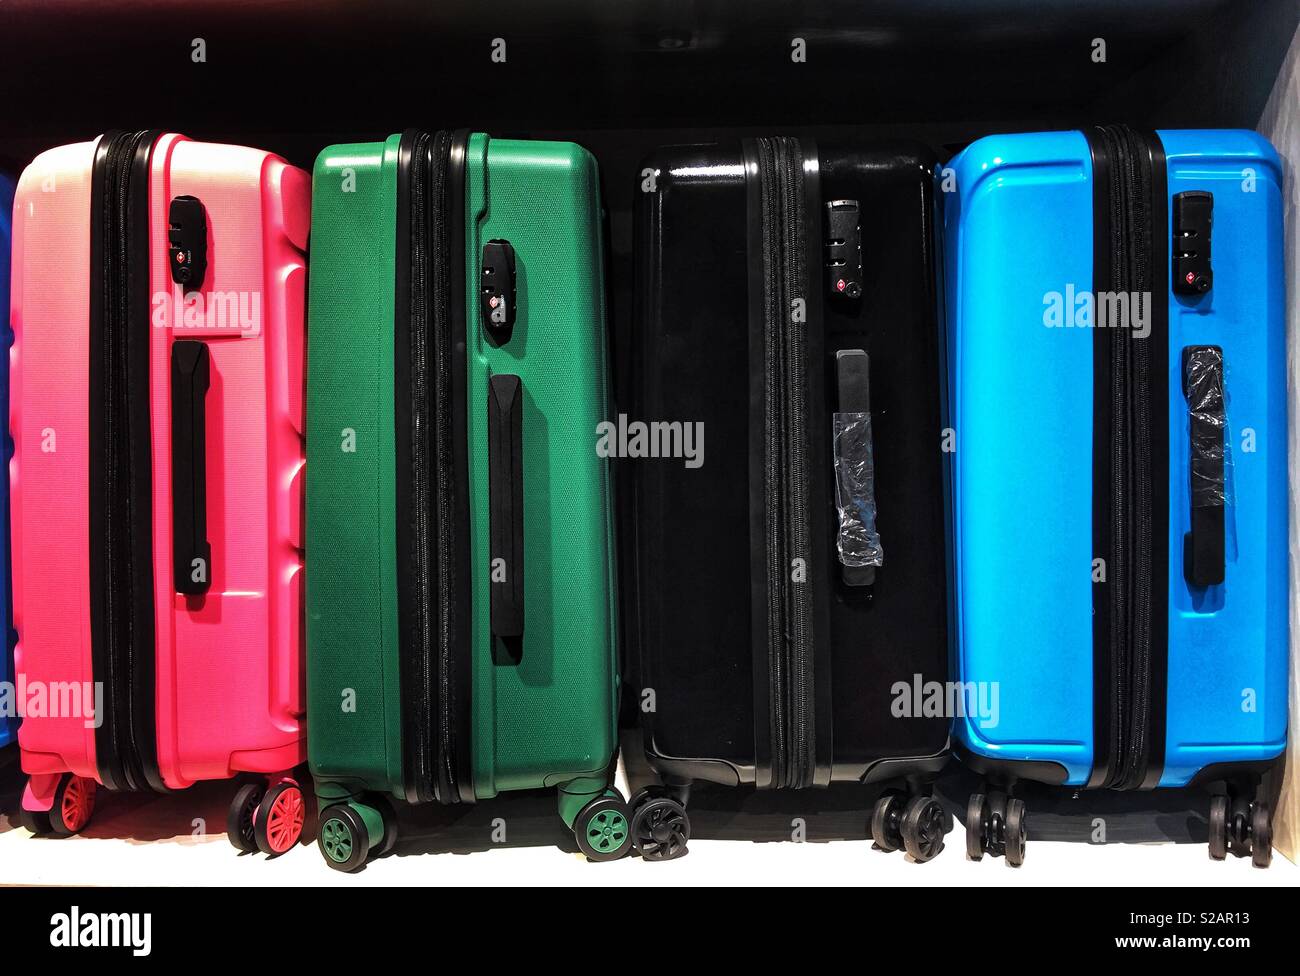 Colourful luggage bags in a row! Travels and vacations! Stock Photo